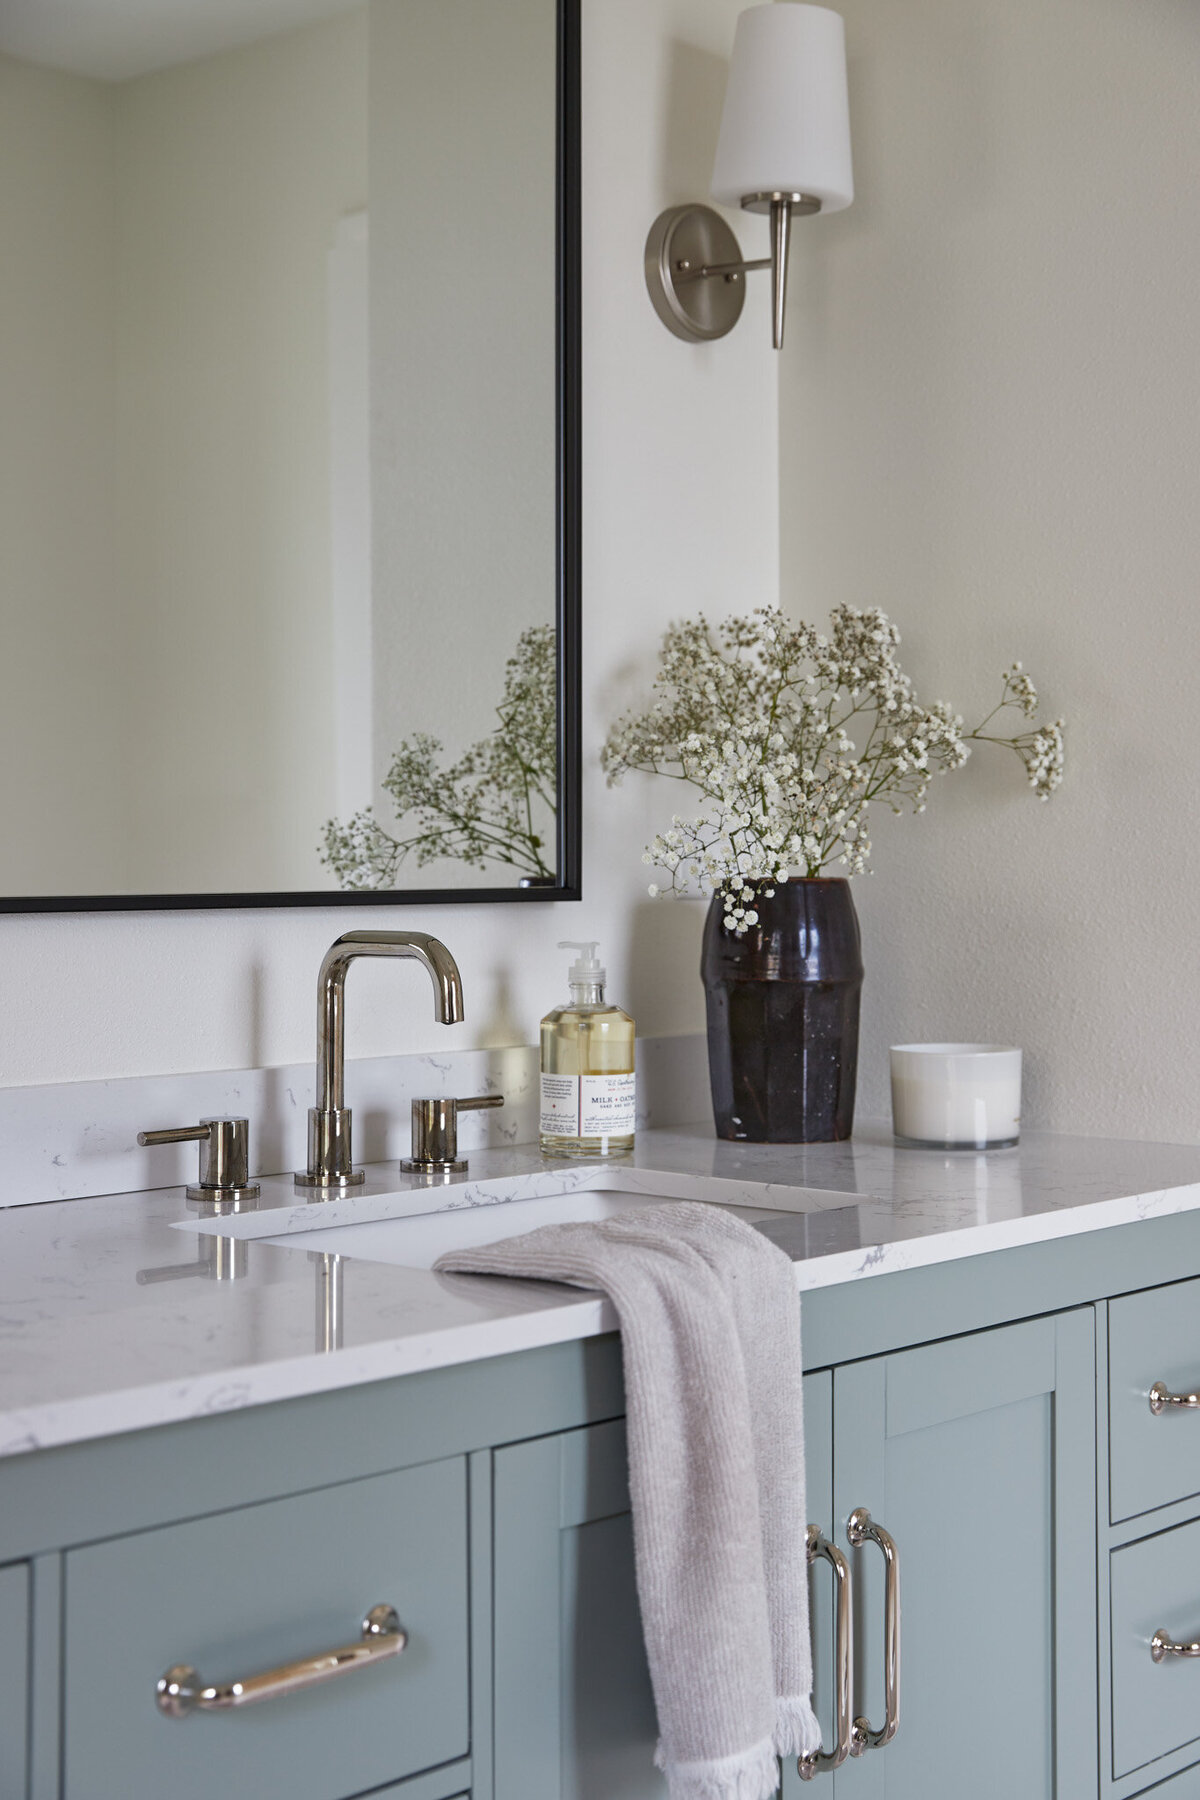 Bathroom with light blue bathroom vanity with silver cabinet pulls. A silver sink faucet with a black mirror above. Next to the sink is a dark brown vase with baby’s breath flowers, a Handsoap pump, and a white candle. Next to the vanity is a white wall with recessed white oak shelves with photos, jars, and a woven basket.